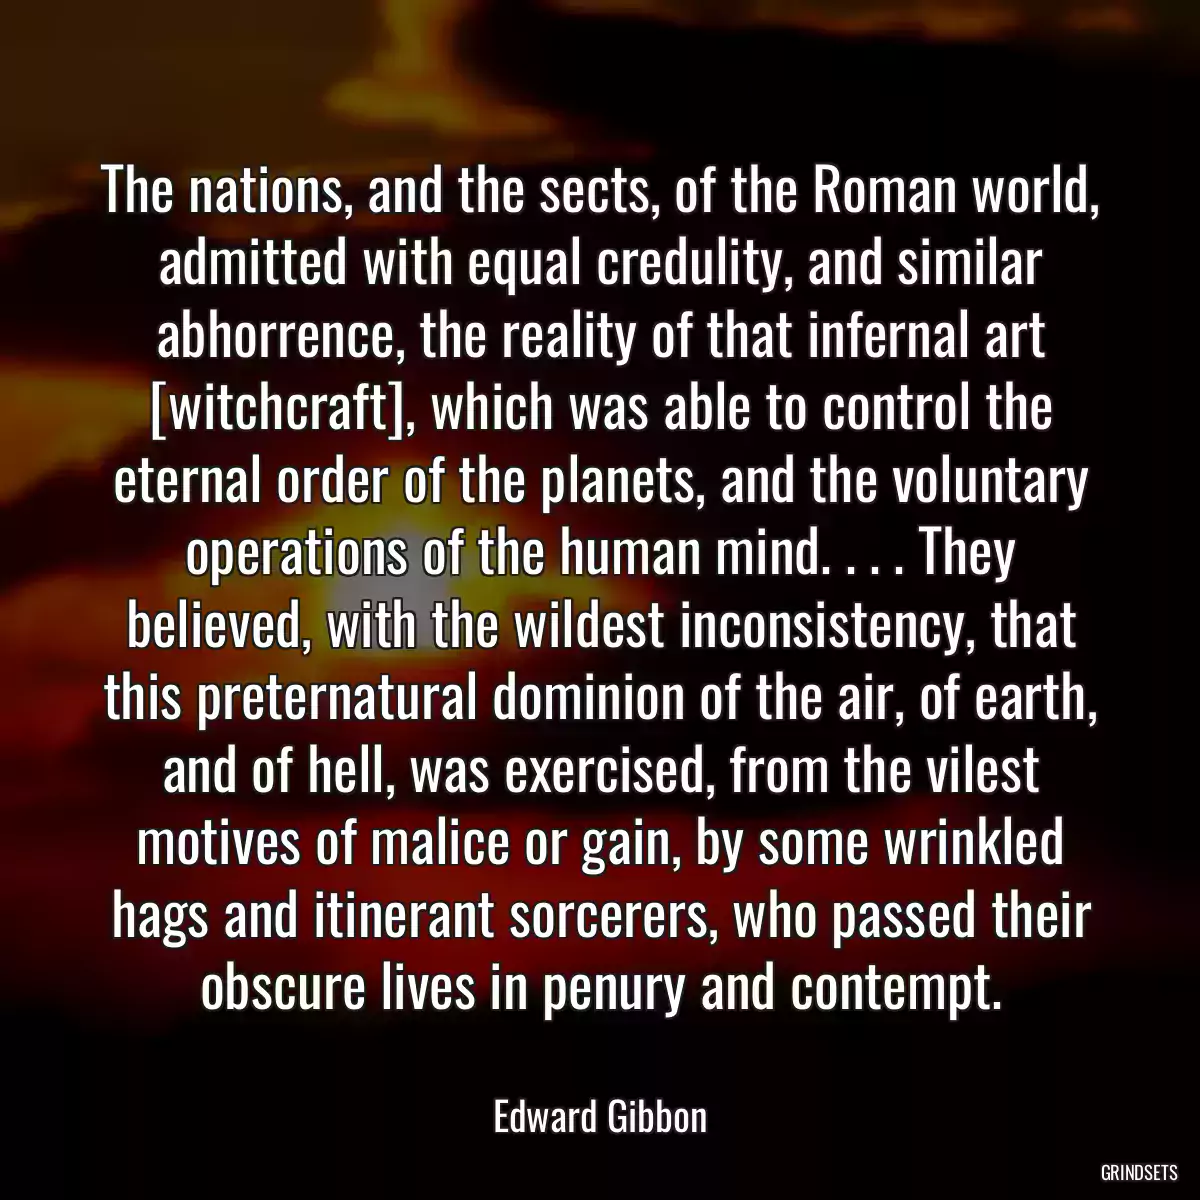 The nations, and the sects, of the Roman world, admitted with equal credulity, and similar abhorrence, the reality of that infernal art [witchcraft], which was able to control the eternal order of the planets, and the voluntary operations of the human mind. . . . They believed, with the wildest inconsistency, that this preternatural dominion of the air, of earth, and of hell, was exercised, from the vilest motives of malice or gain, by some wrinkled hags and itinerant sorcerers, who passed their obscure lives in penury and contempt.